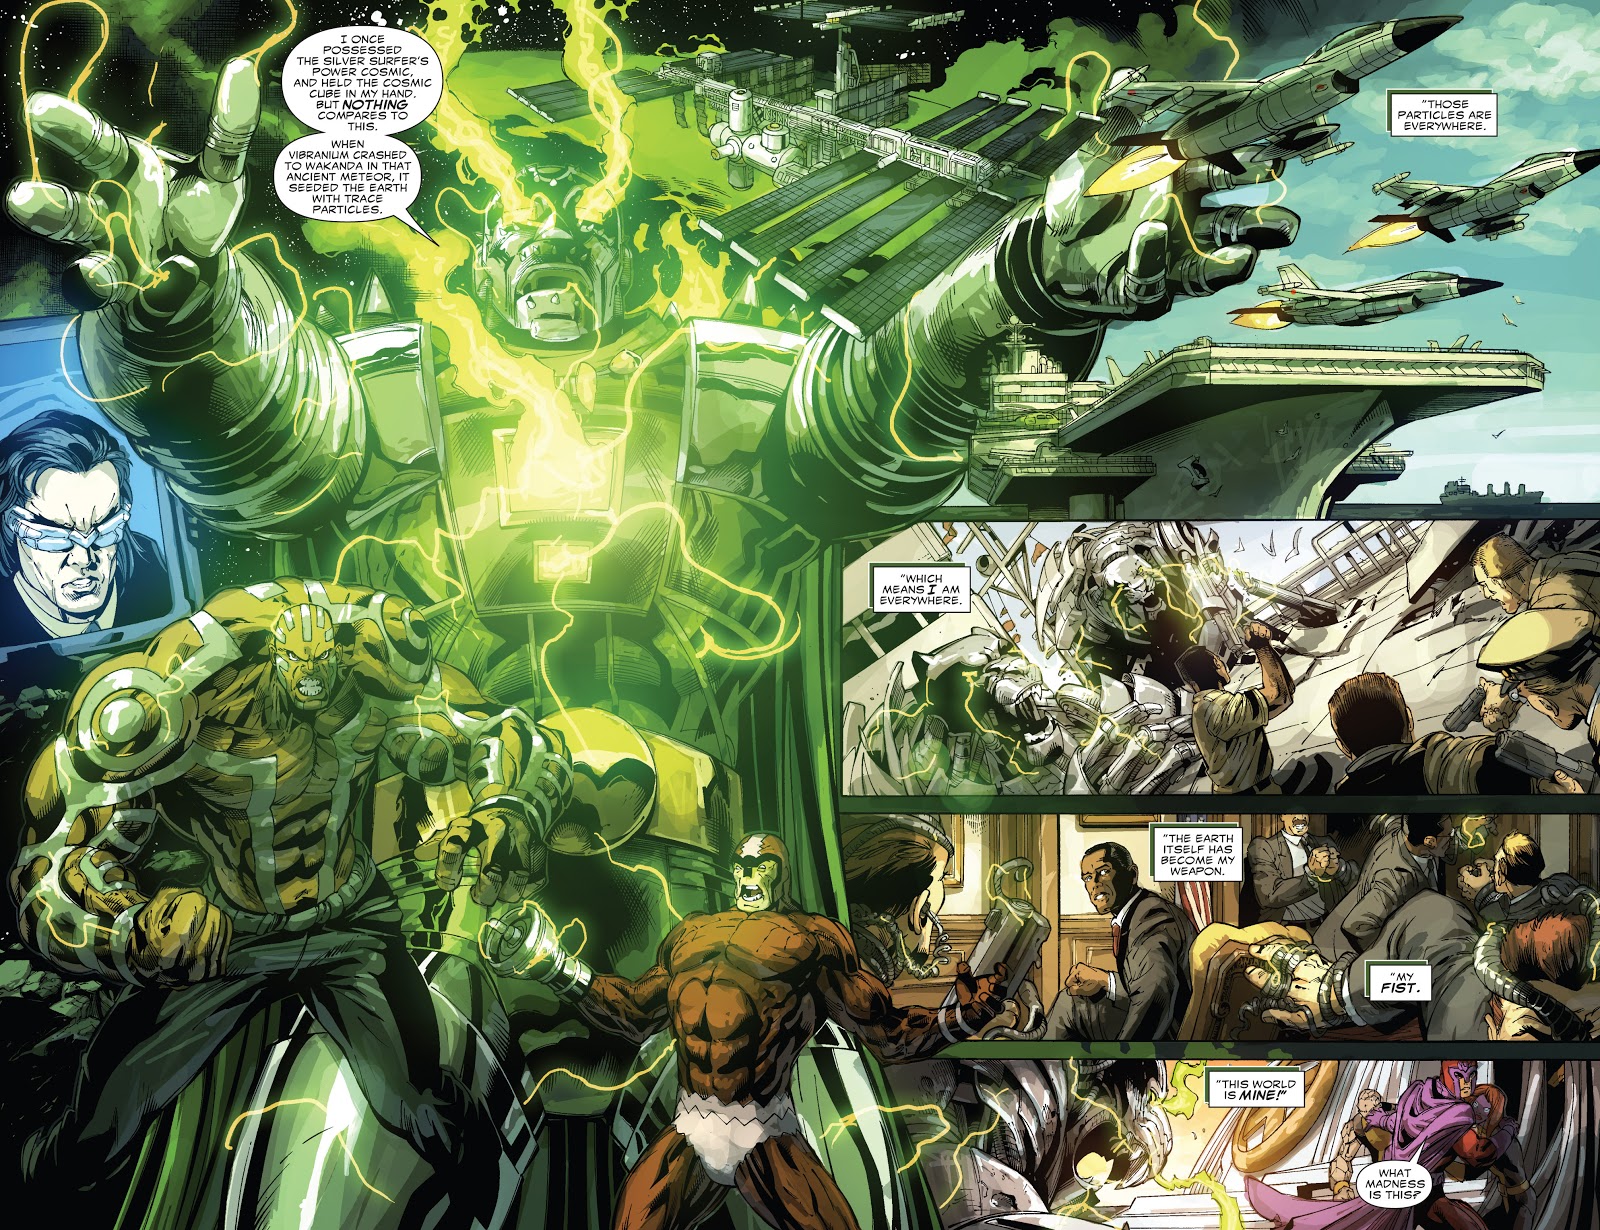 In 'Doomwar' (2010) #6, Doctor Doom upgrades his armor to planetary level with stolen Vibranium from Wakanda.